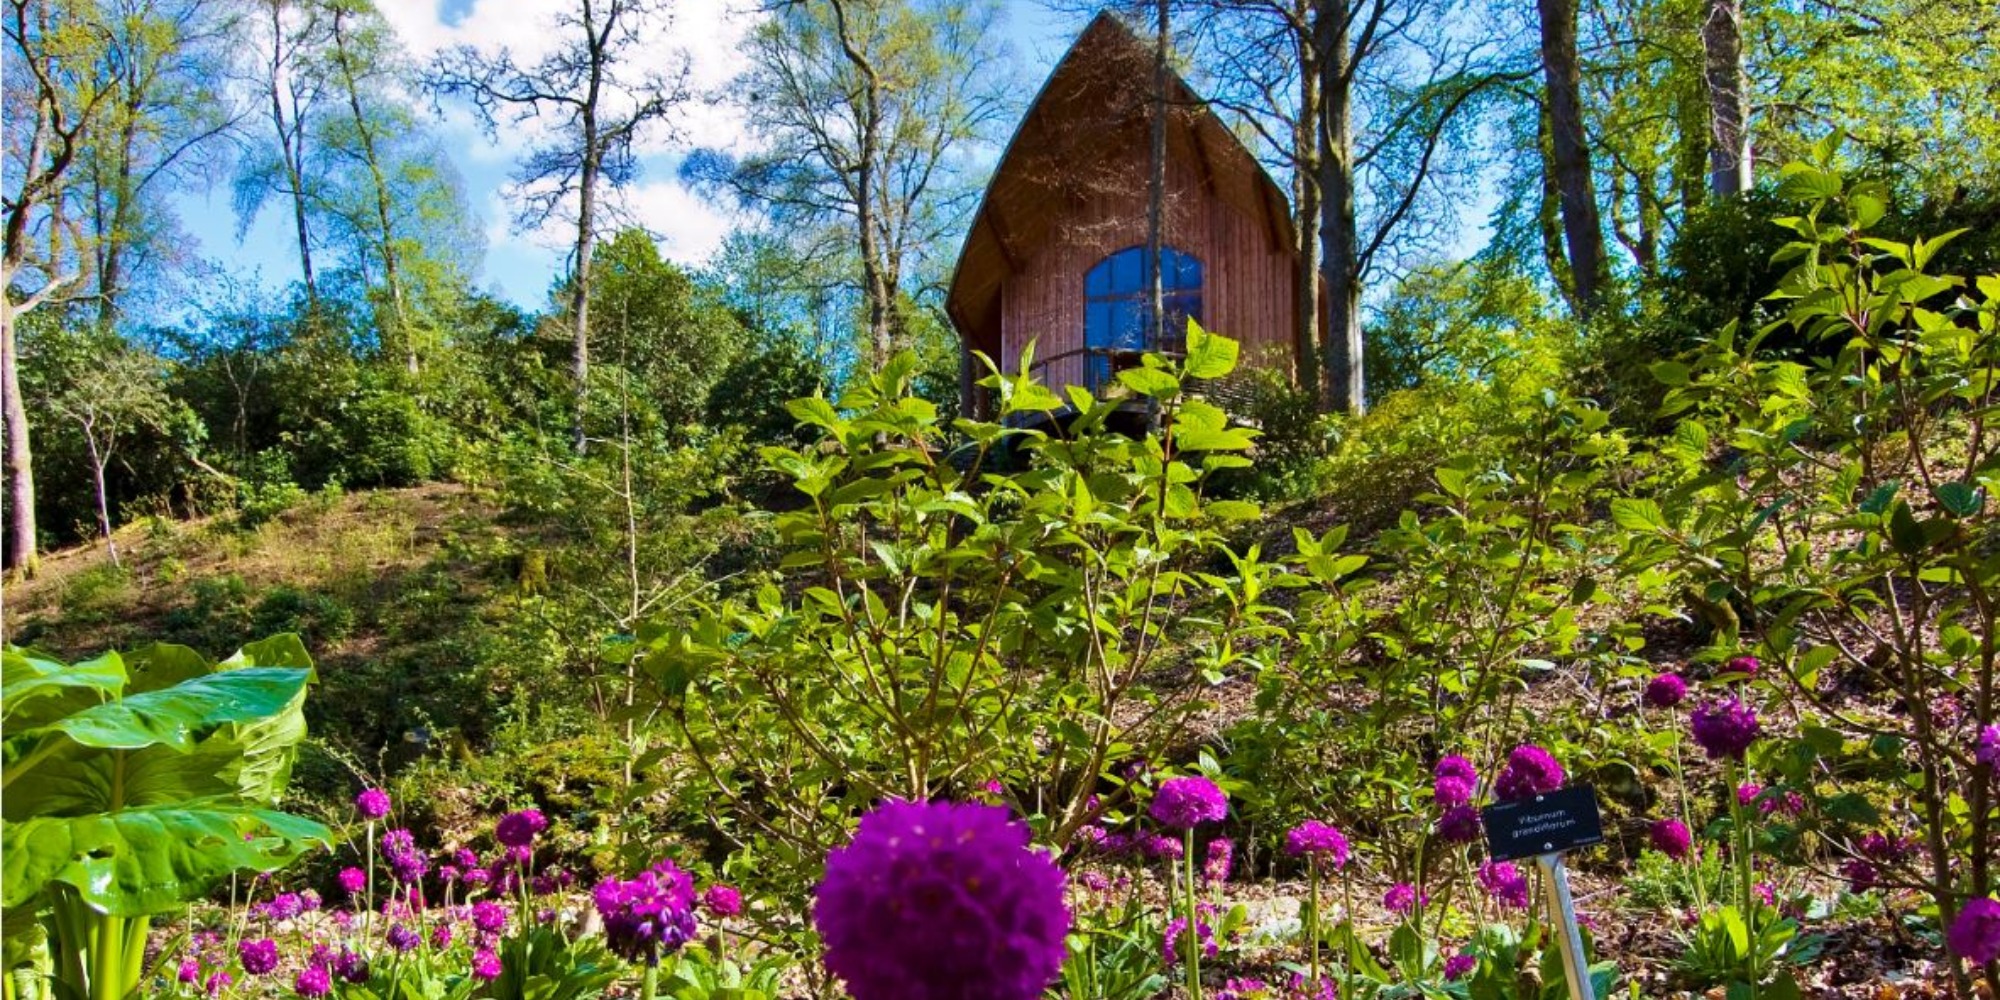 An image of a wooded area with purple flowers in the foreground stretching to a lot of greenery, as the hill rises at the top is a hut with a pointed roof and a large glass window facing towards the hill. Behind the building are blue skies and trees surrounding.